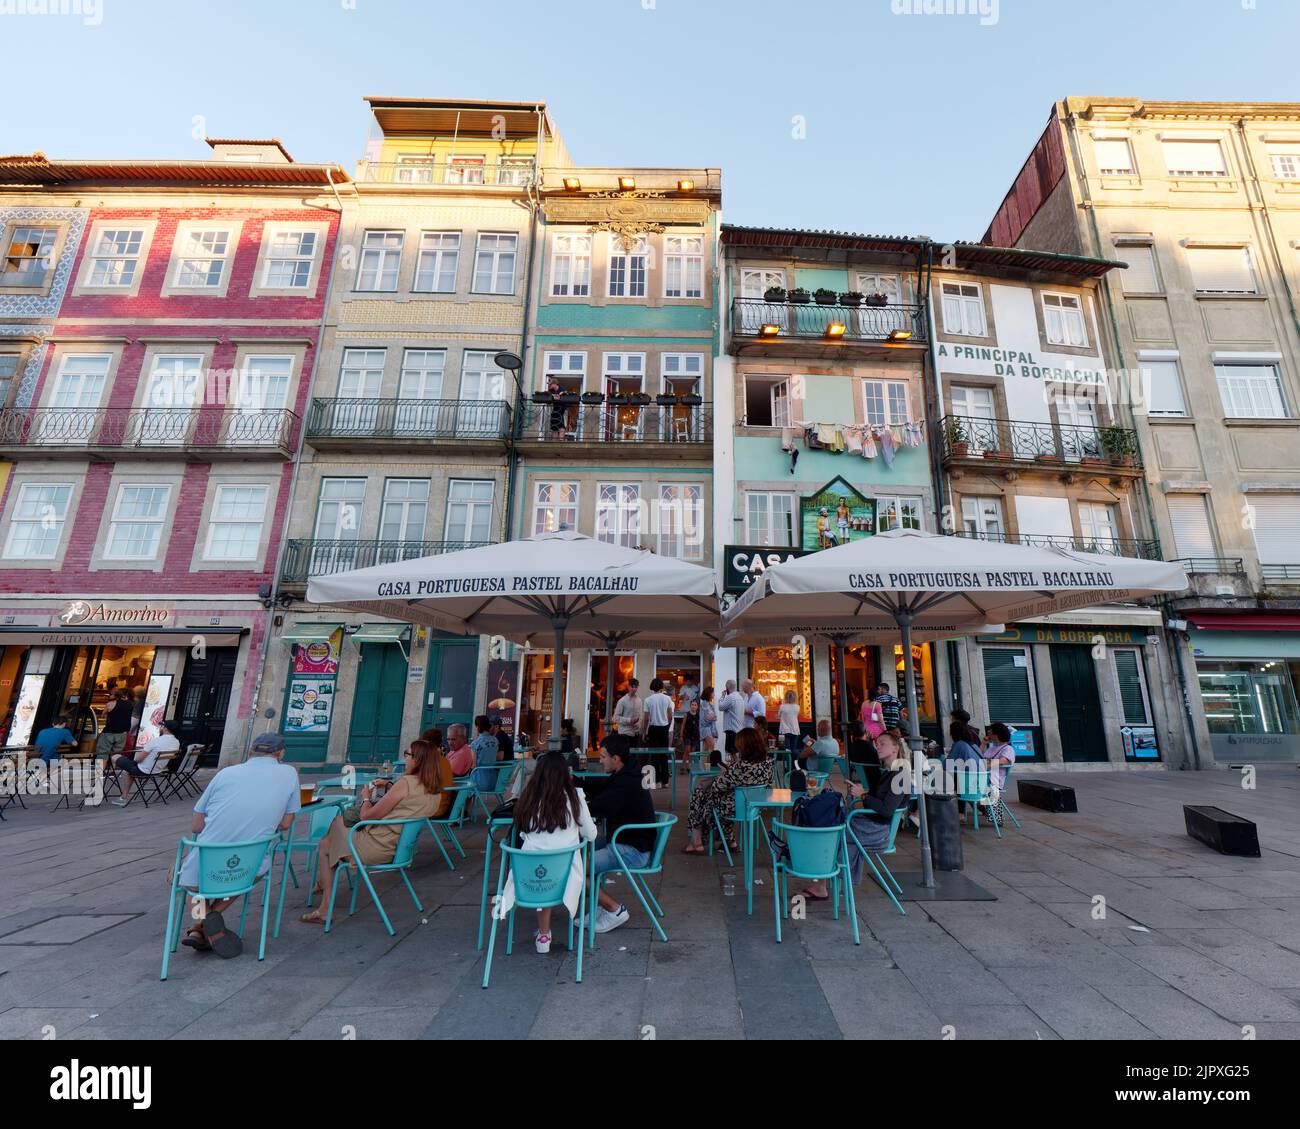 Exterior of Restaurant and buildings in the Clérigos district of Porto, Portugal on a summers evening. Stock Photo